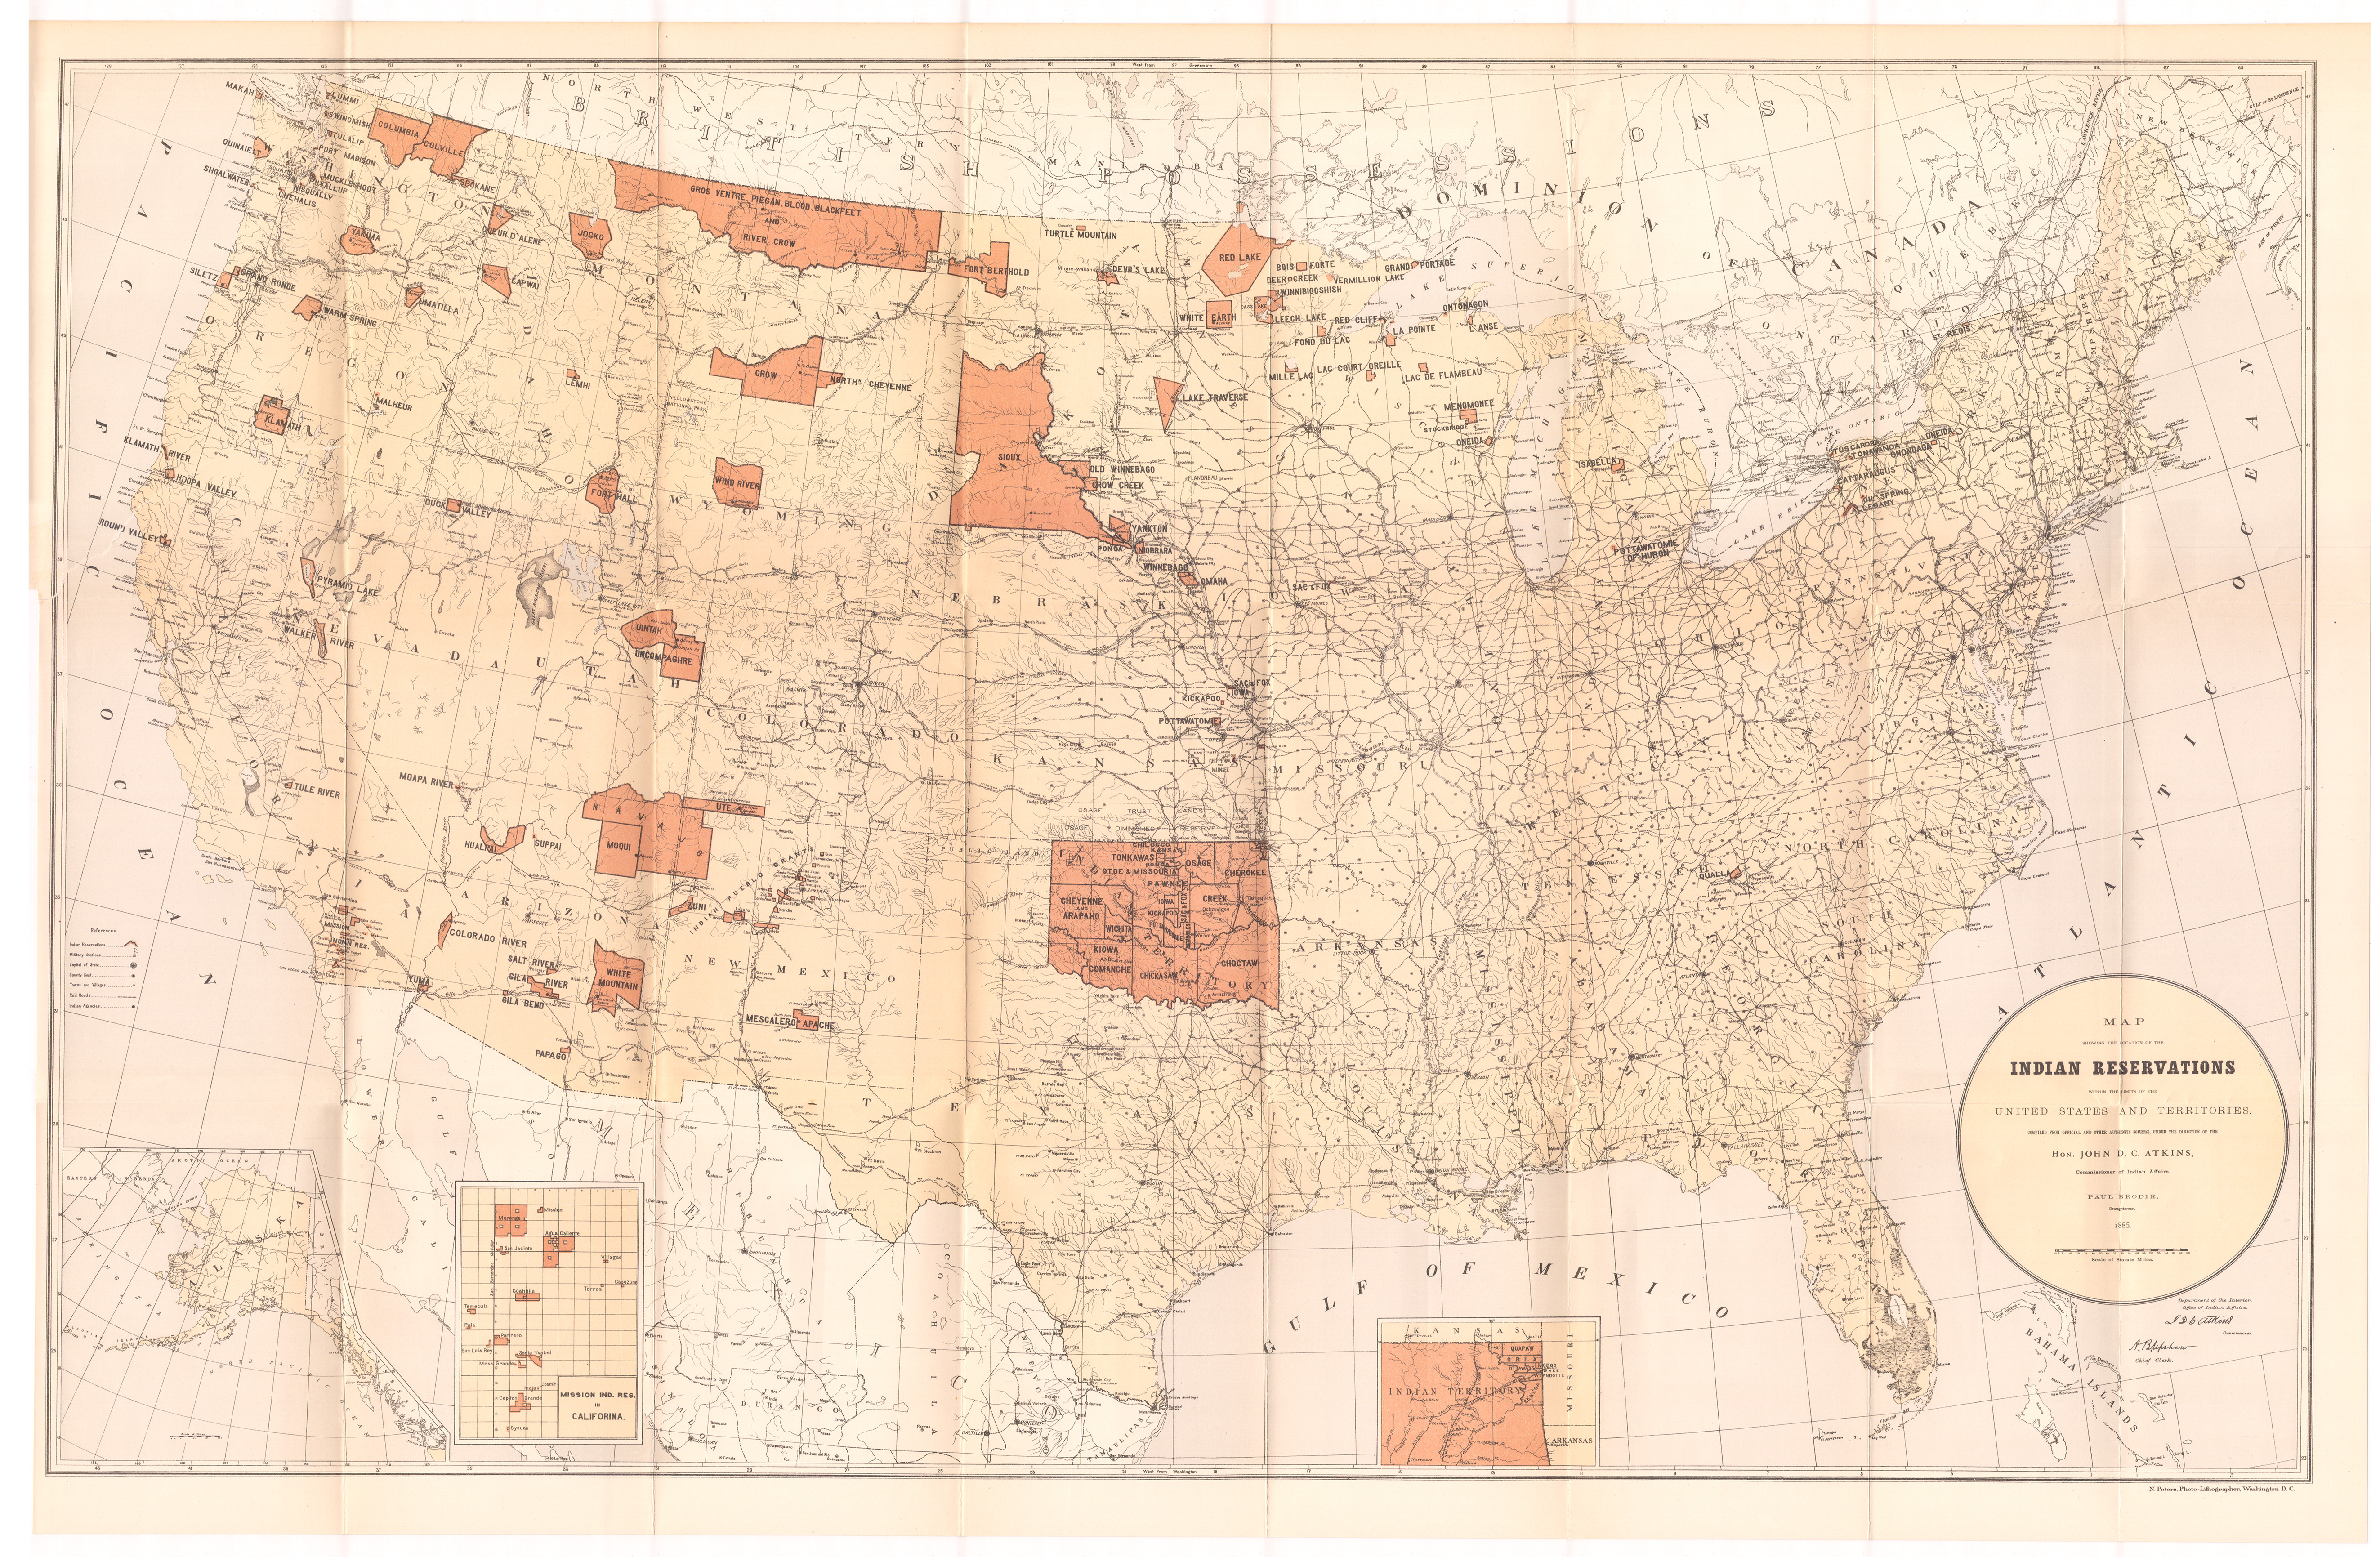 1885 Paul Brodie map of Indian Reservations